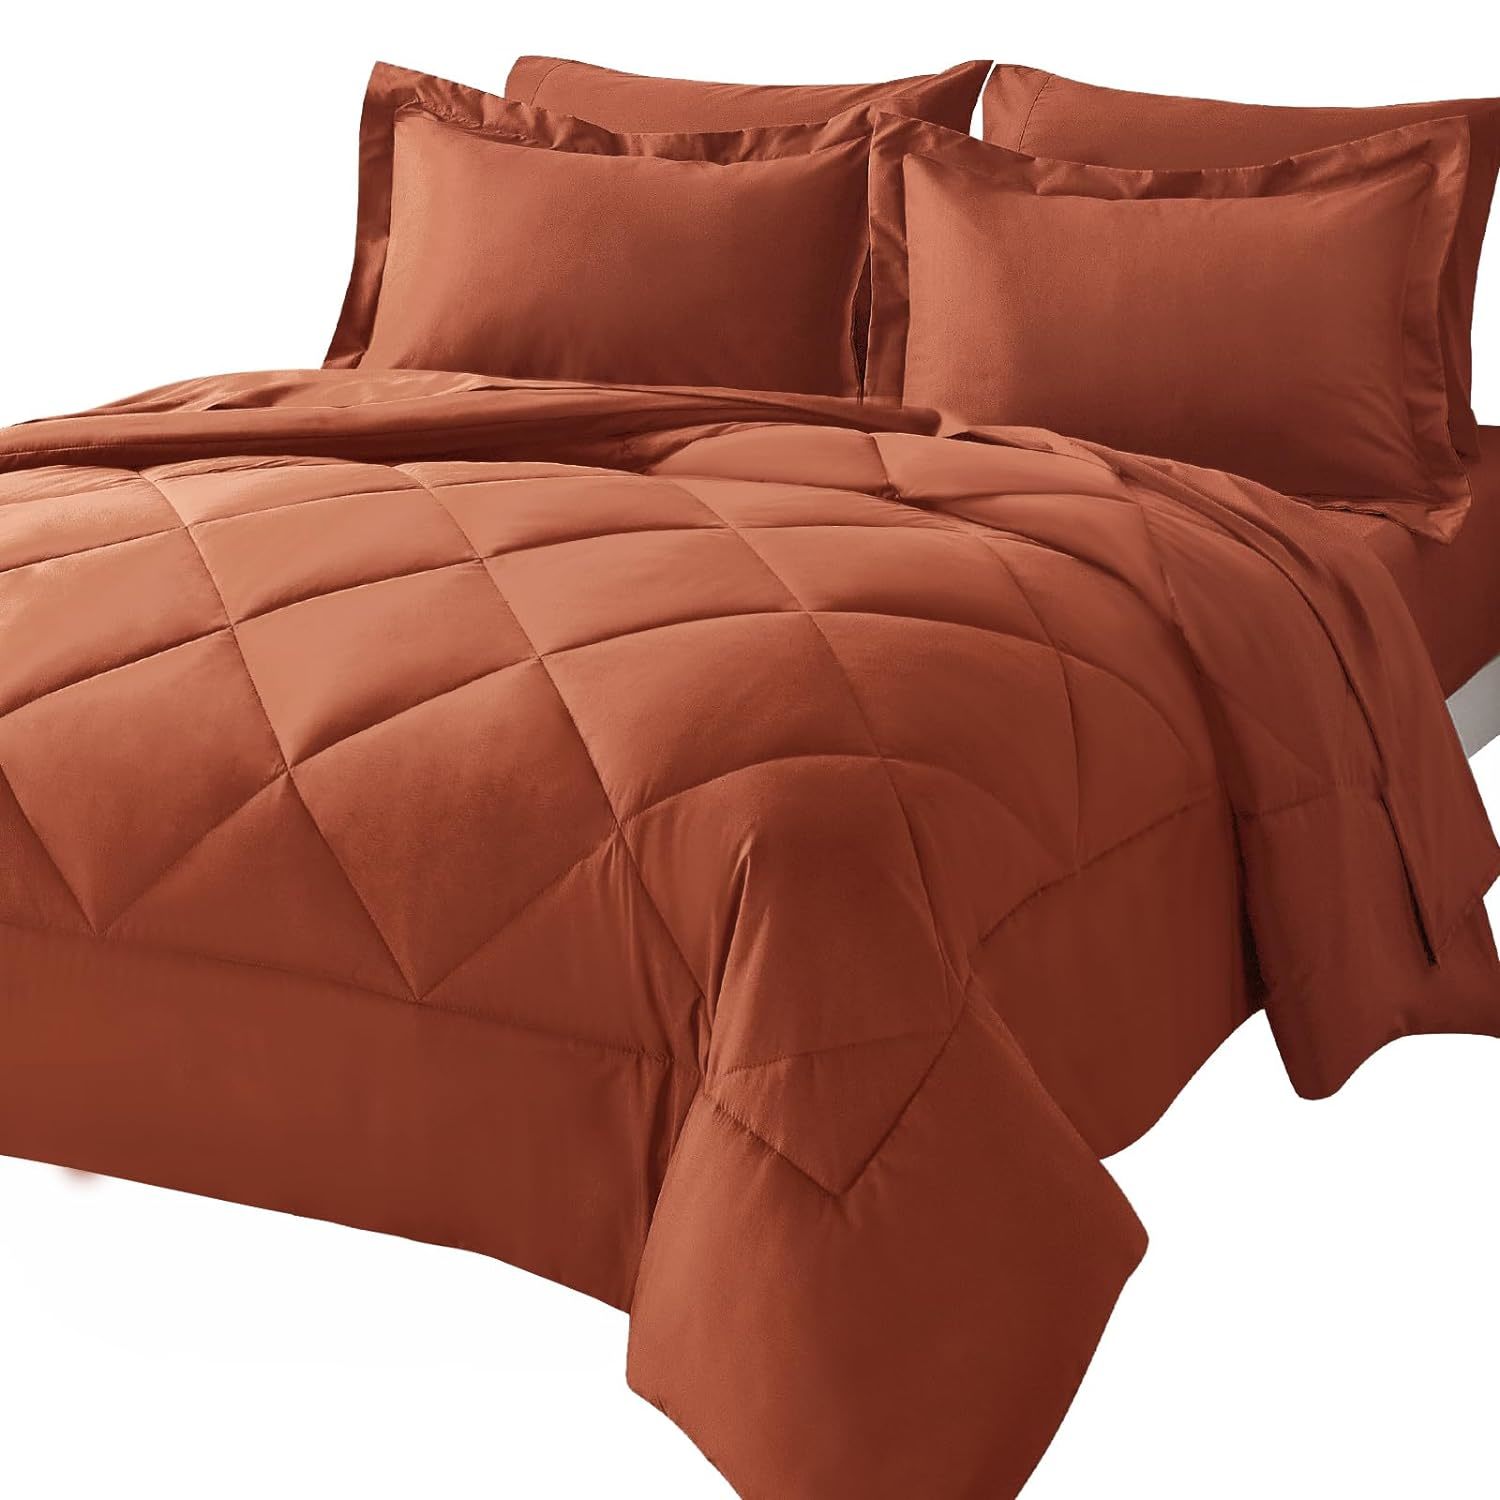 Primary image for Queen Comforter Set With Sheets 7 Pieces Bed In A Bag Burnt Orange All Season Be